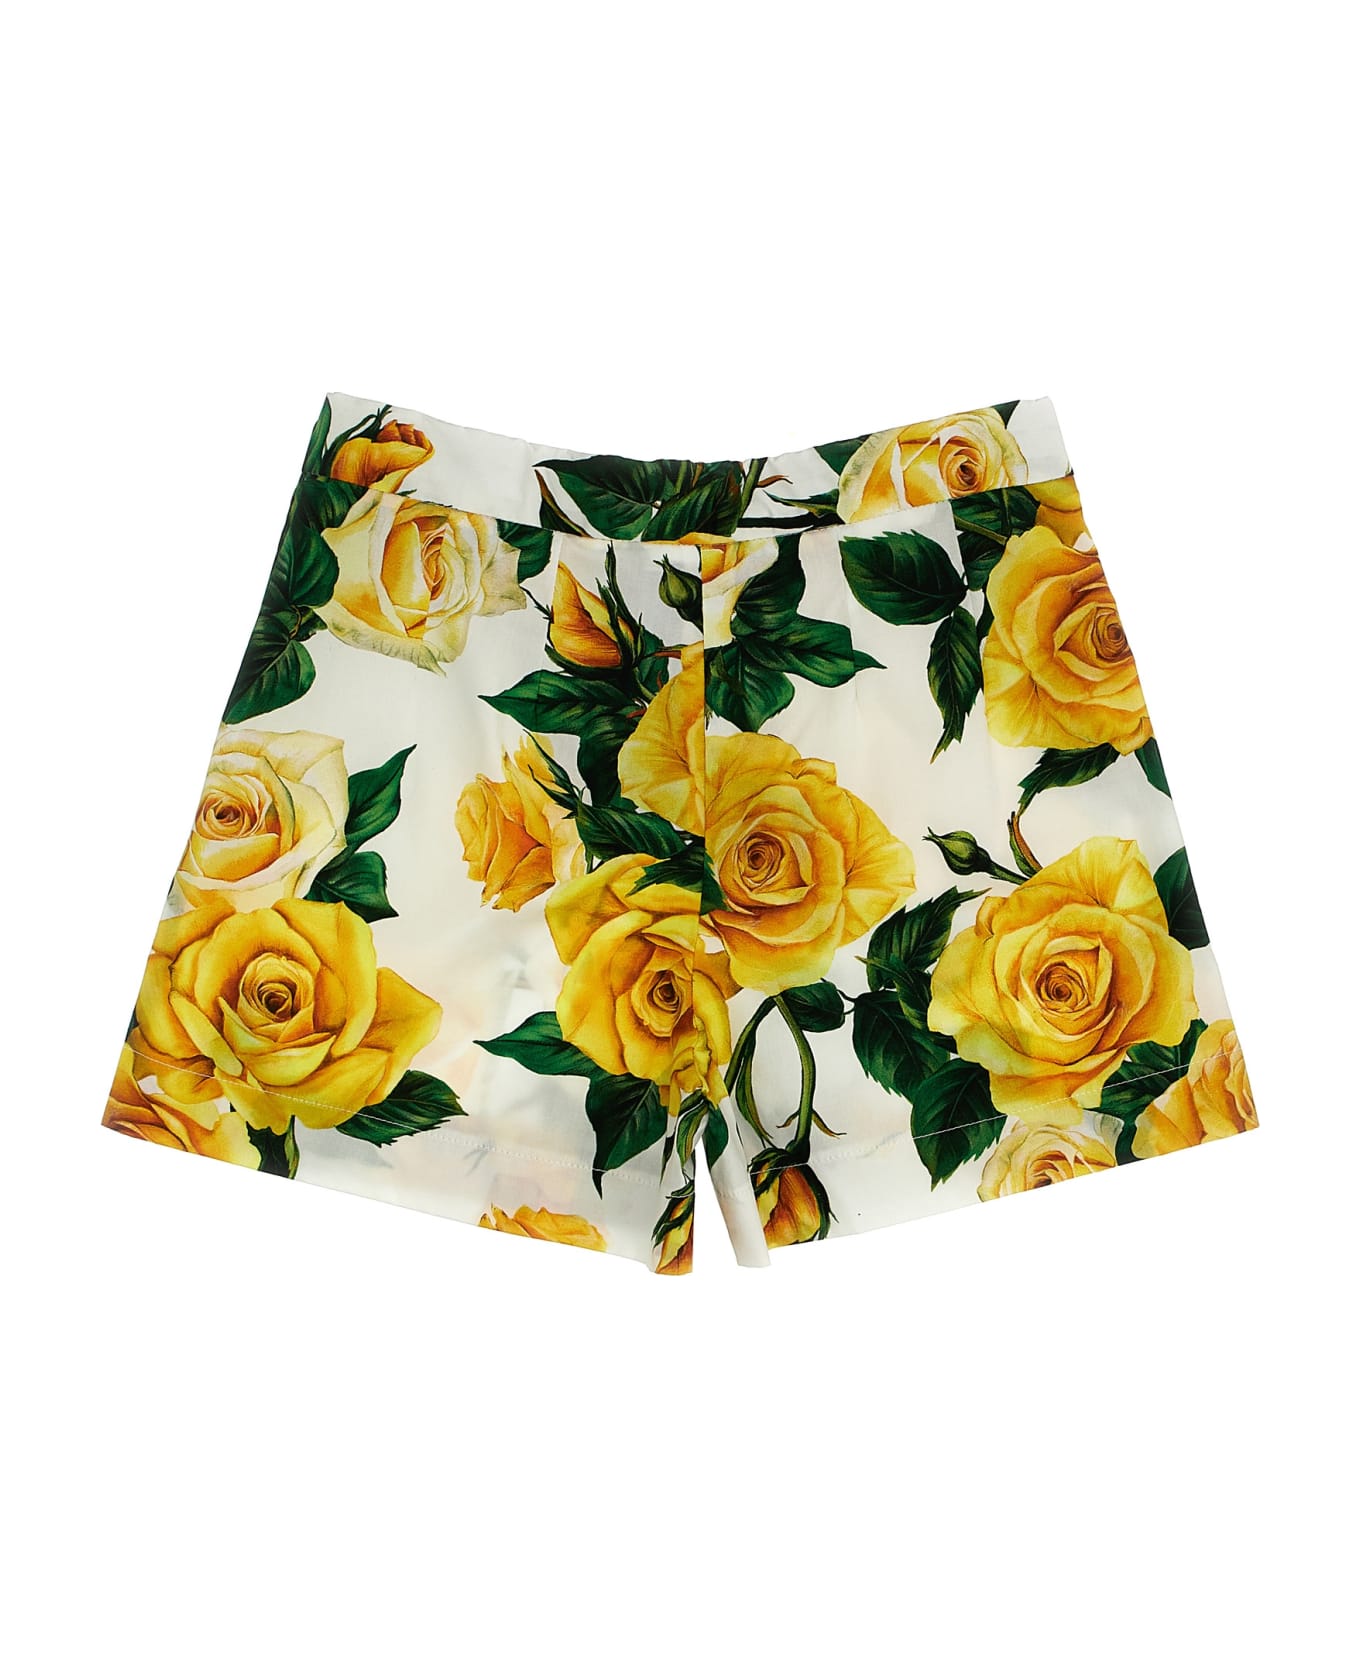 Dolce & Gabbana 'rose Gialle' Shorts - Multicolore ボトムス